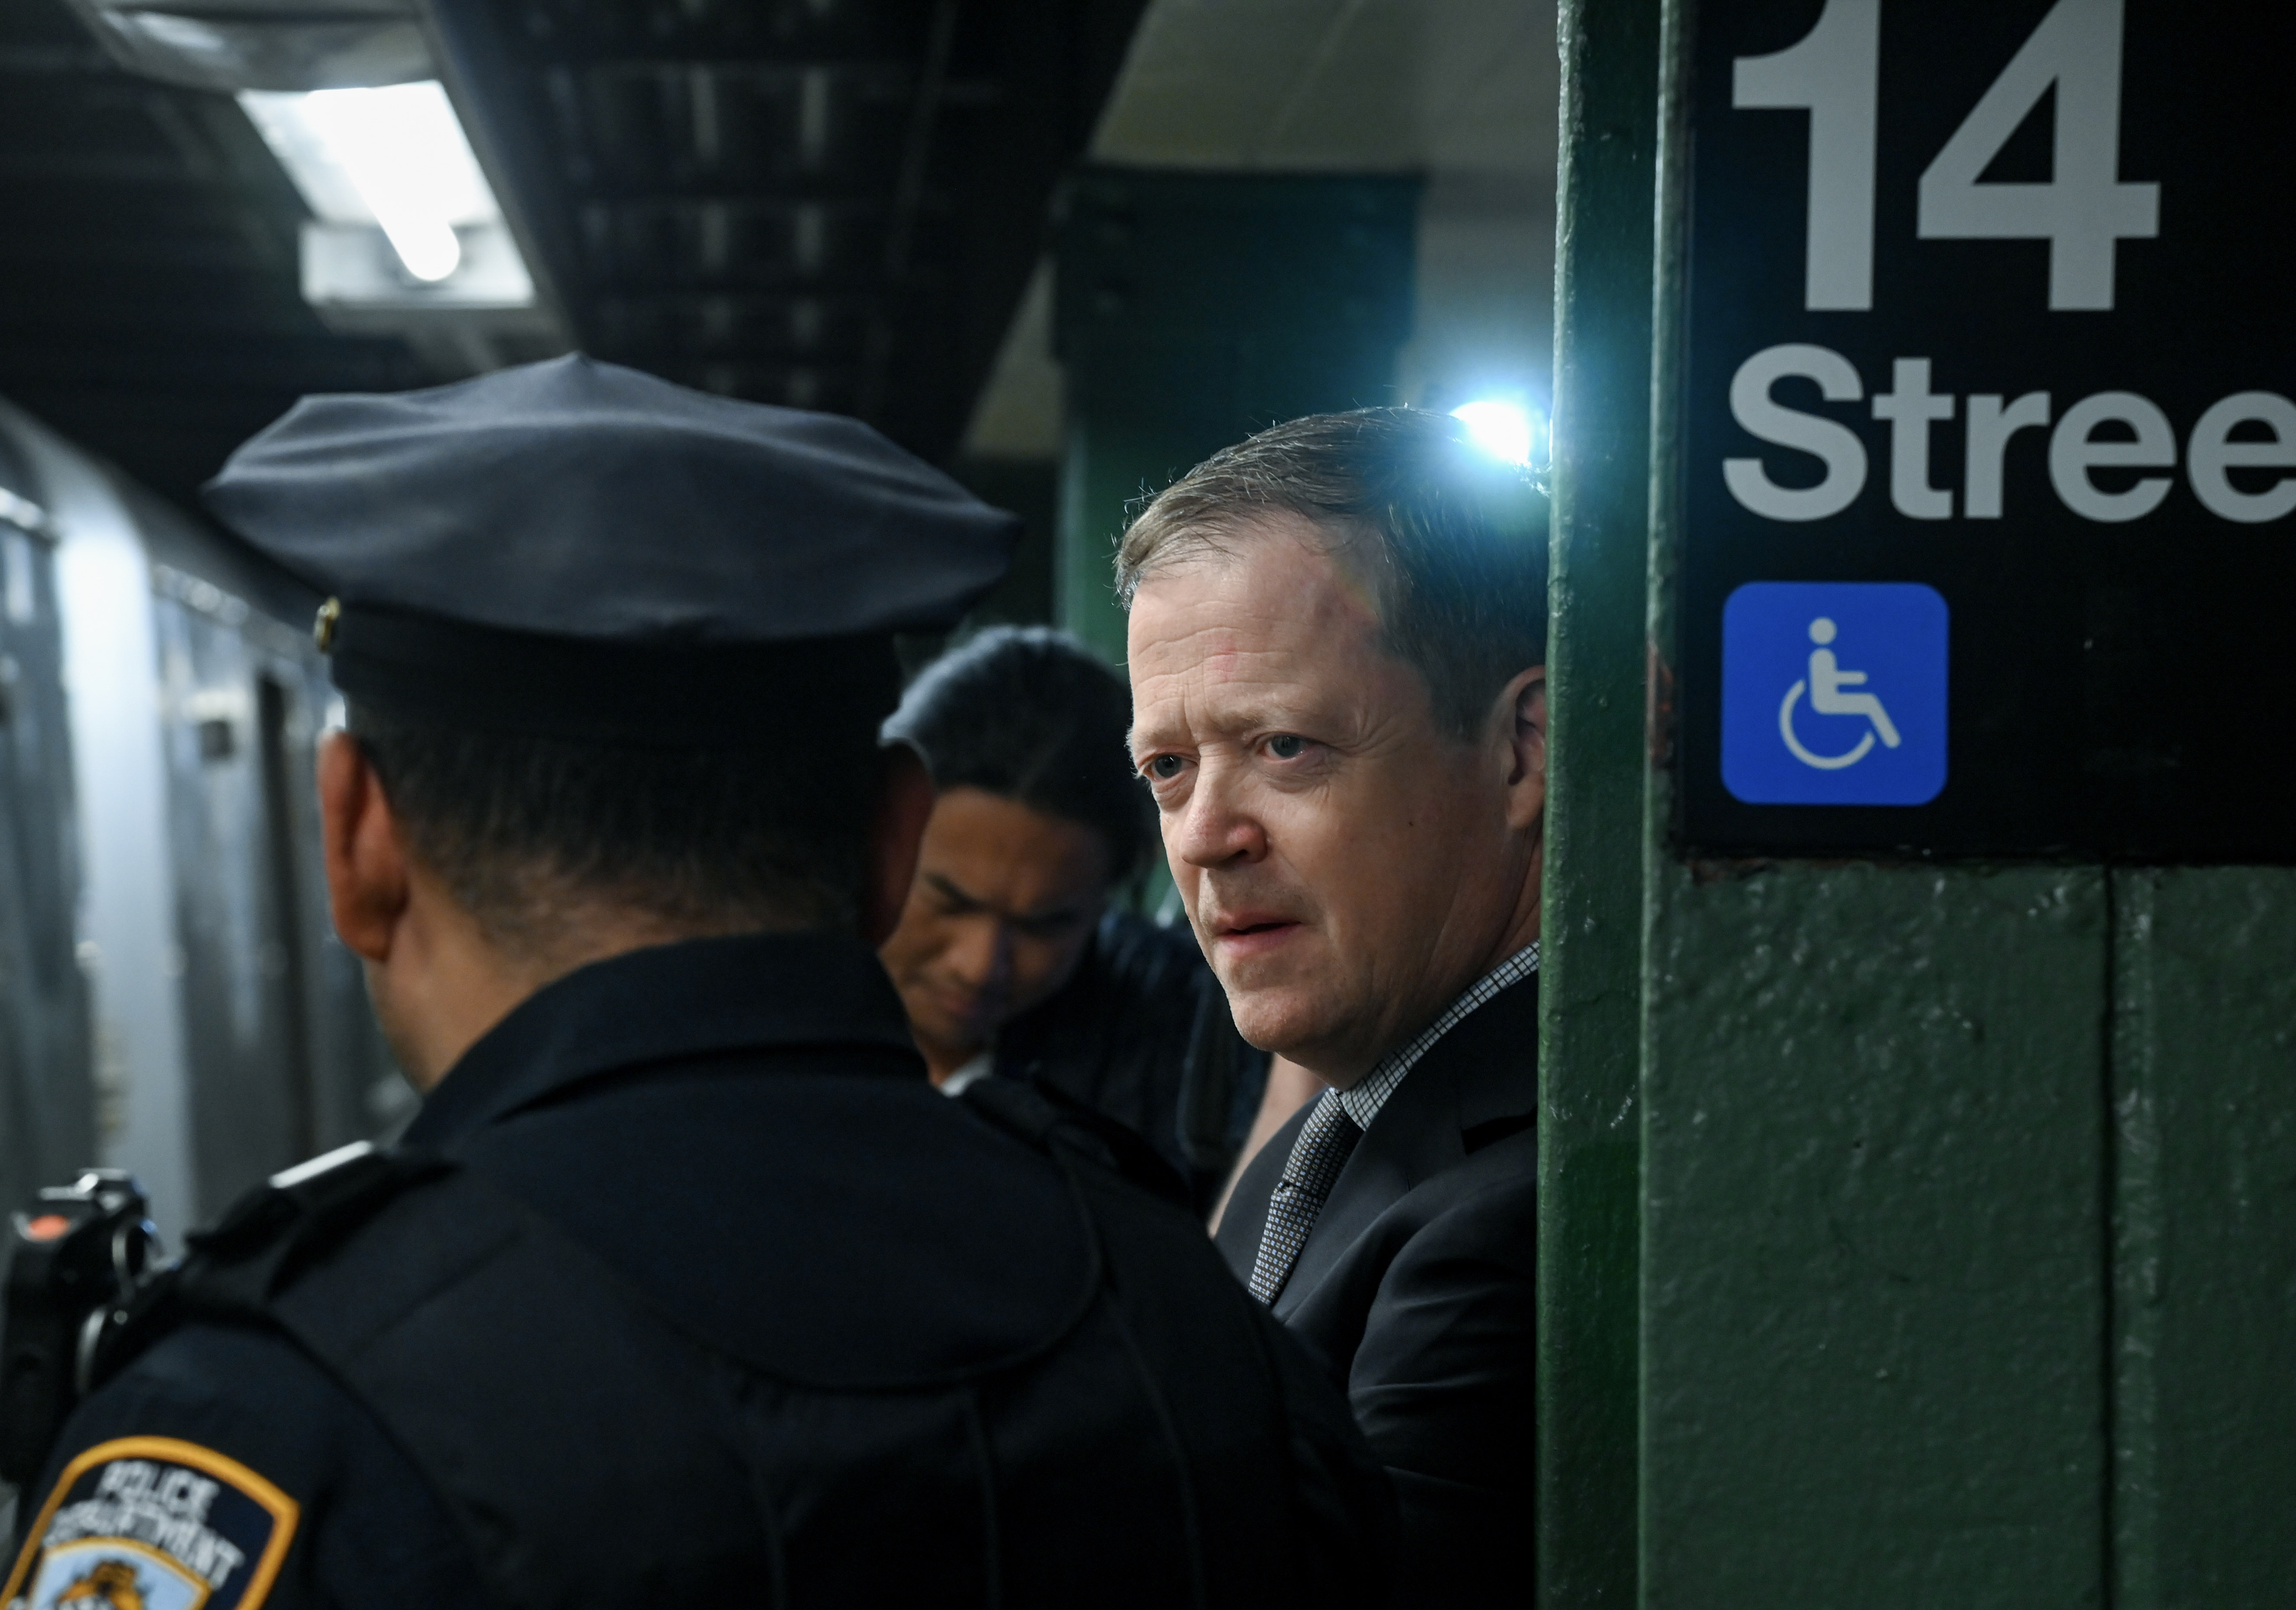 PHOTOS: NYC Transit Leadership Ride Subway to Ensure Public Safety Announcements are Being Made by Conductors on Trains